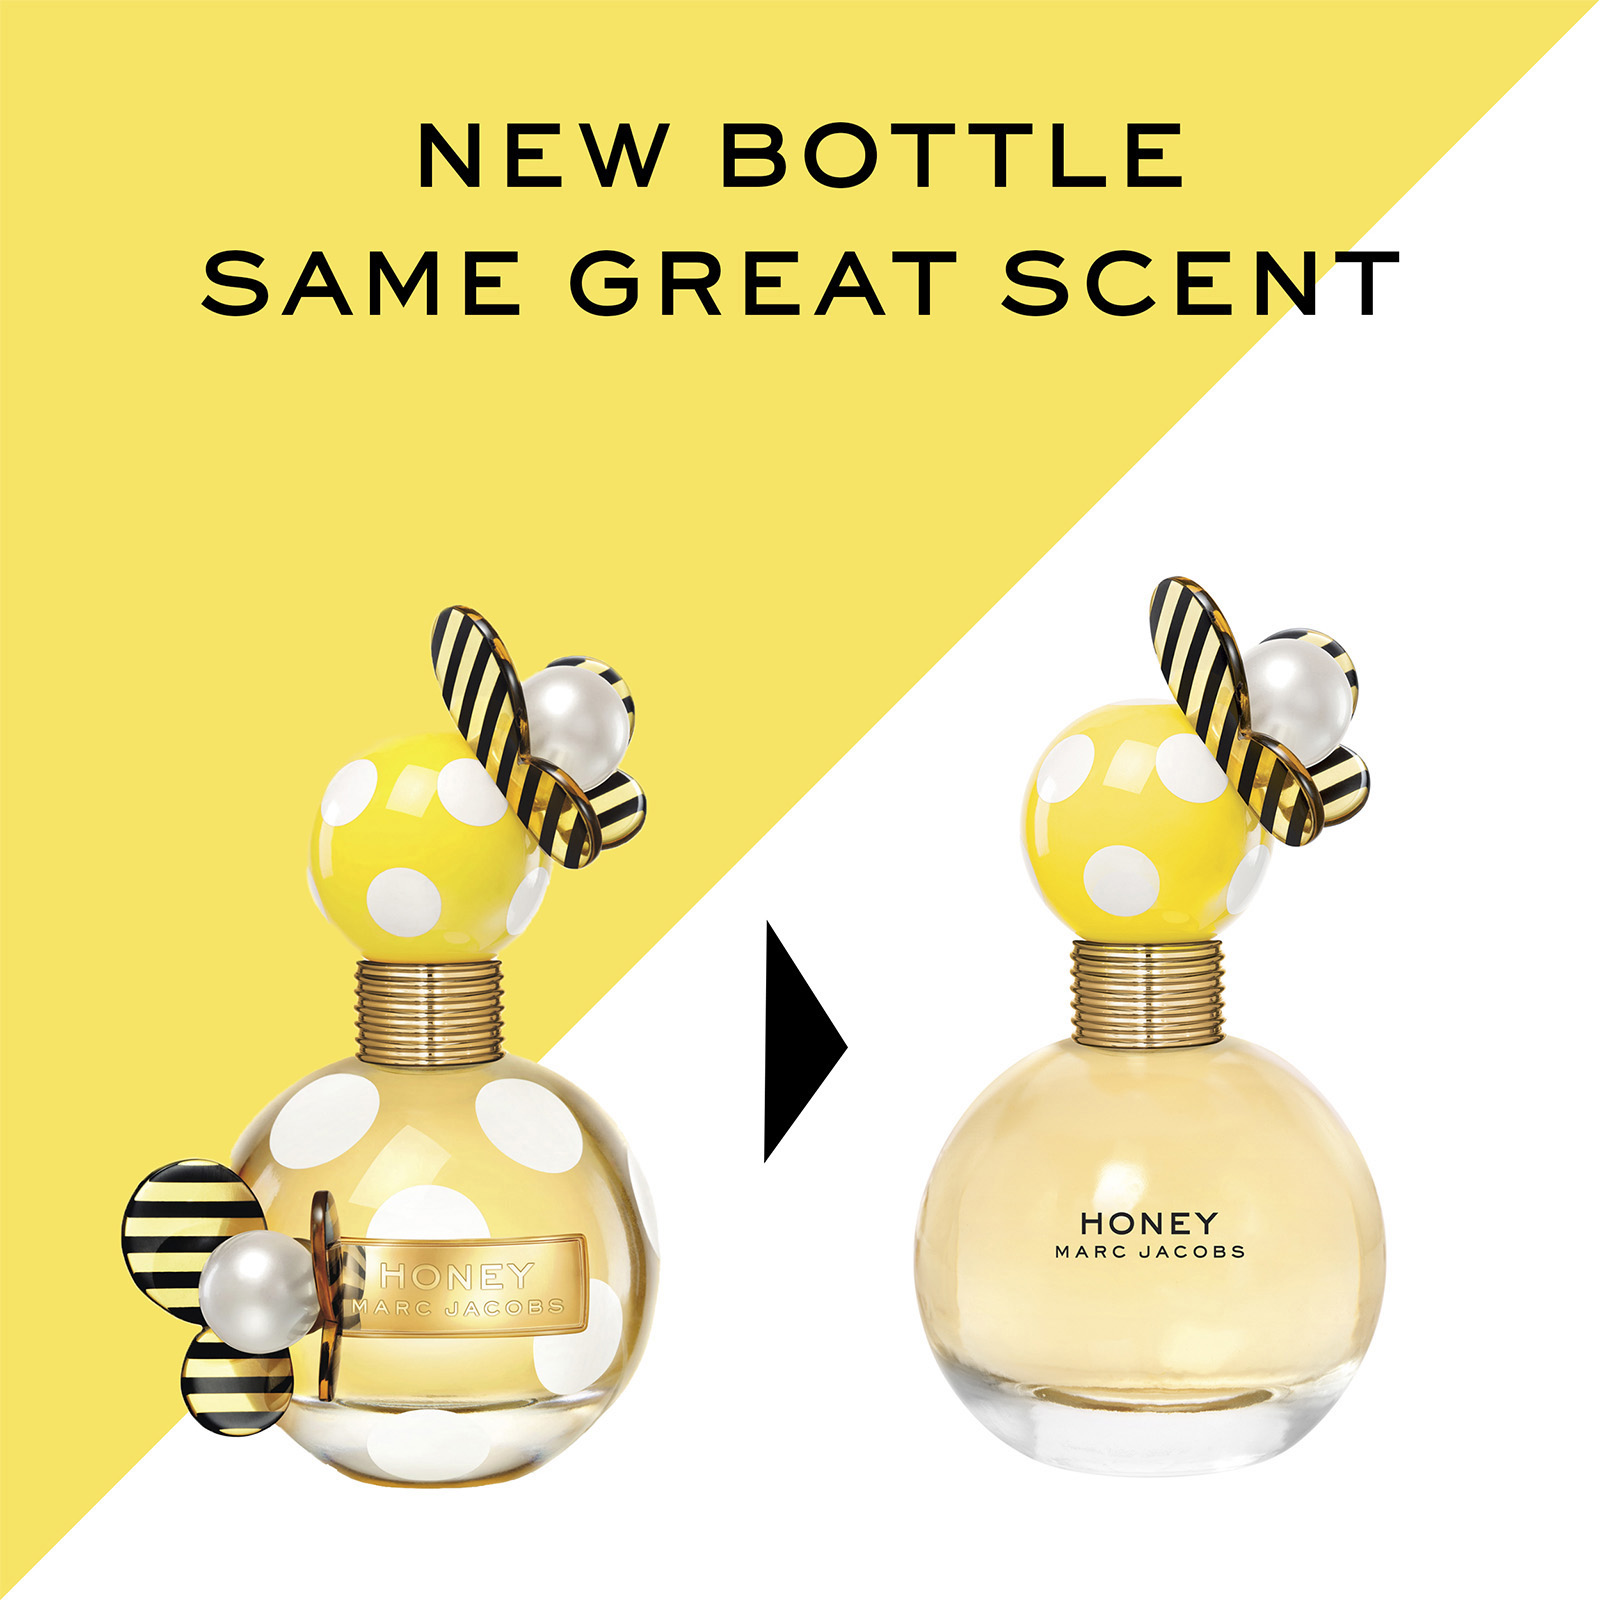 New bottle same great scent